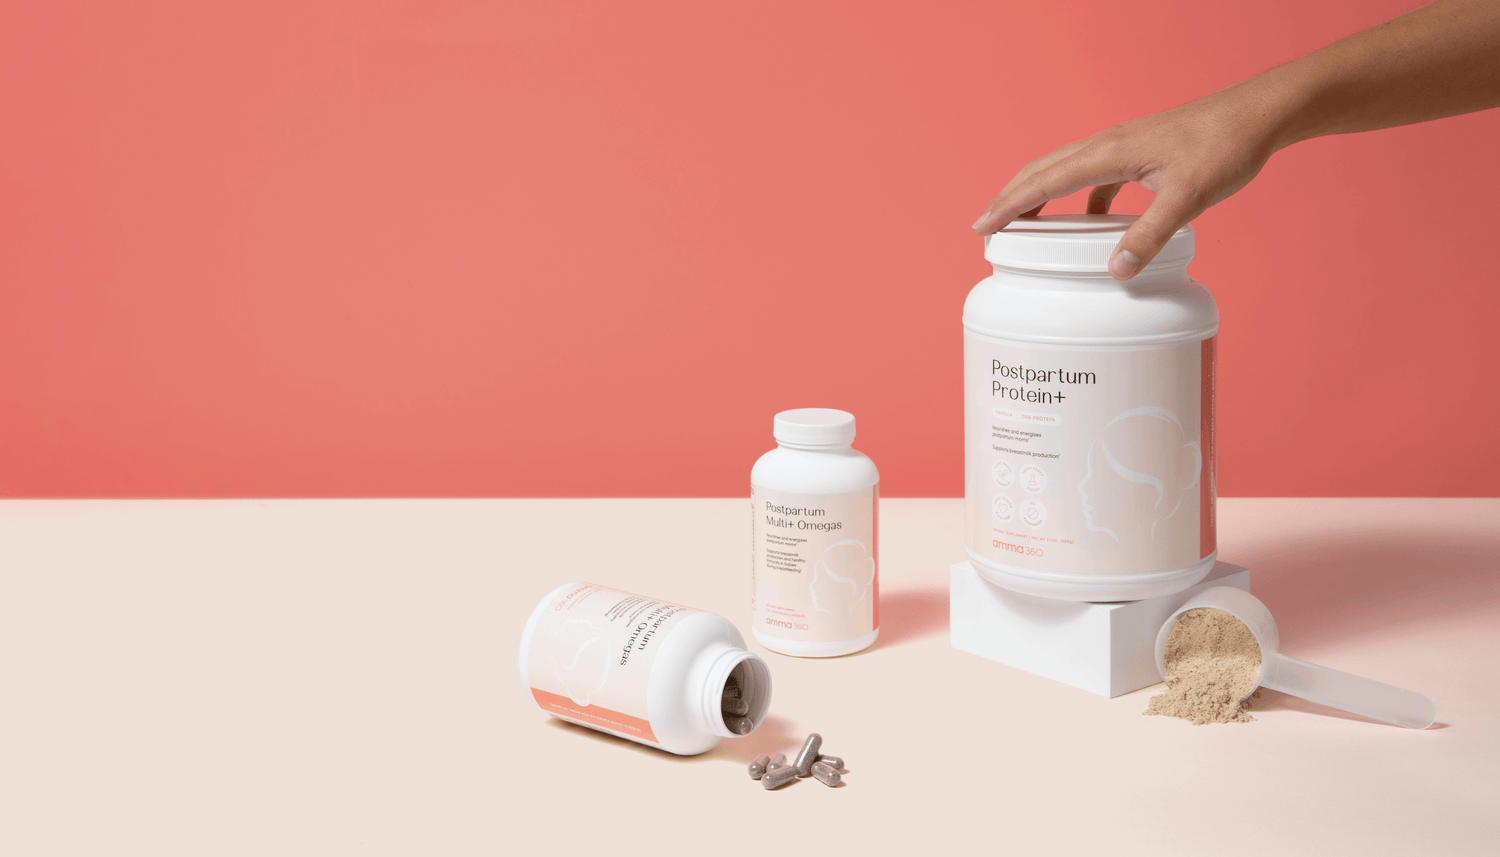 Postpartum product bundle image with hand holding product and capsules poured out on tabletop